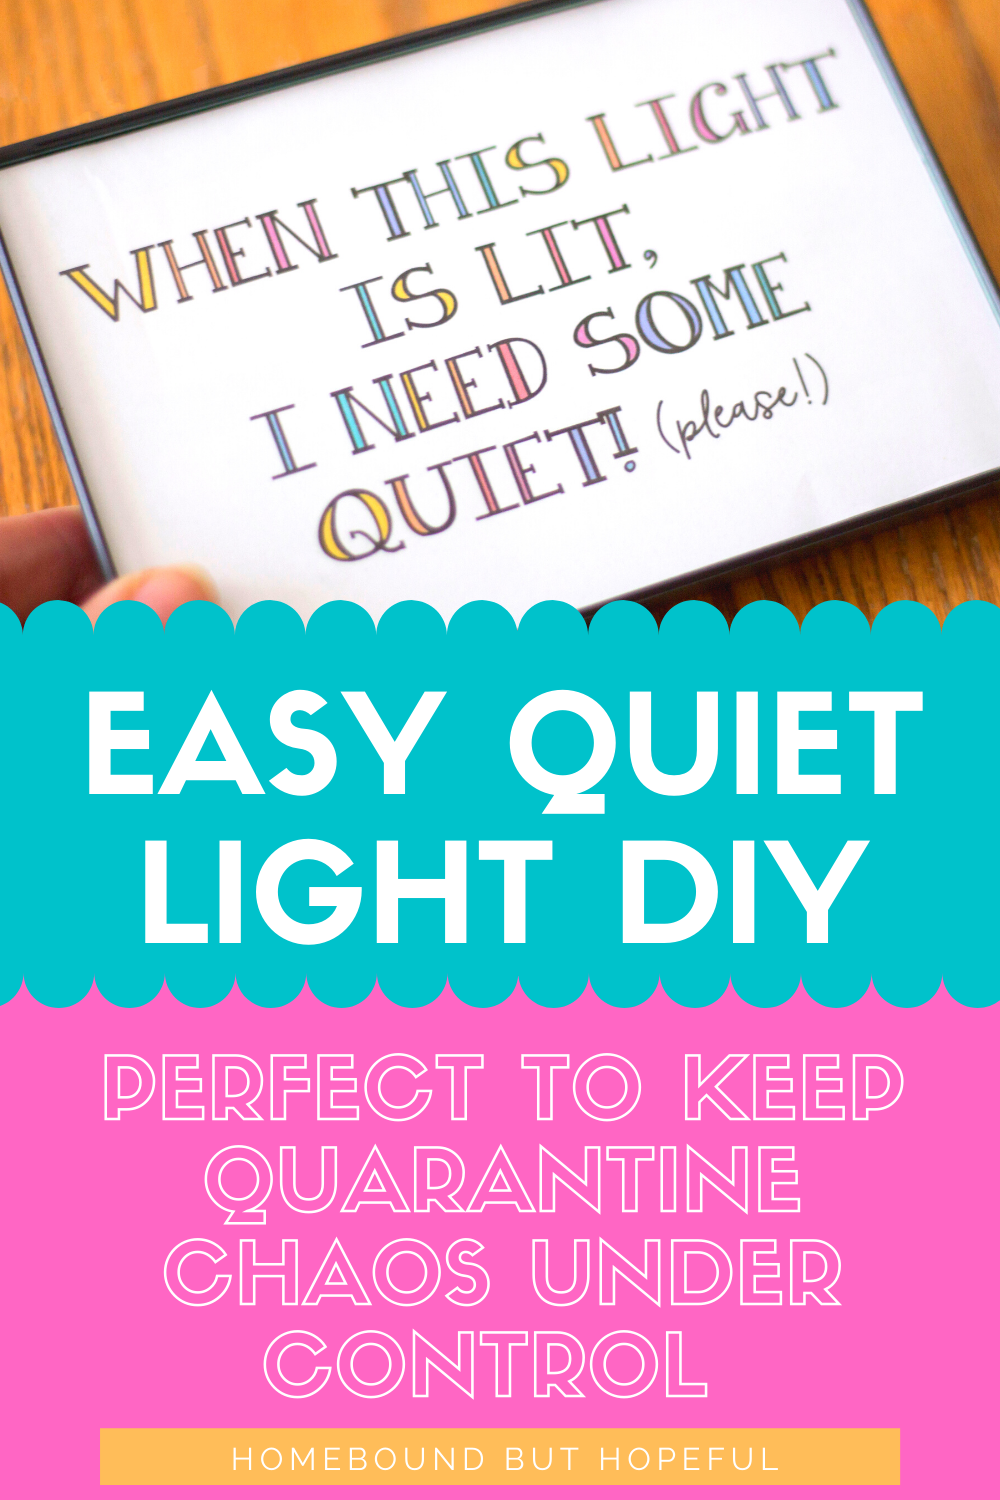 Is all the noise from having everyone at home making you a little crazy? Claim some quiet time of your own with this cute and easy Quiet Light DIY Idea, which includes a free printable! #introvert #quarantine #pandemic #workfromhome #workathome #peaceandquiet #freeprintable